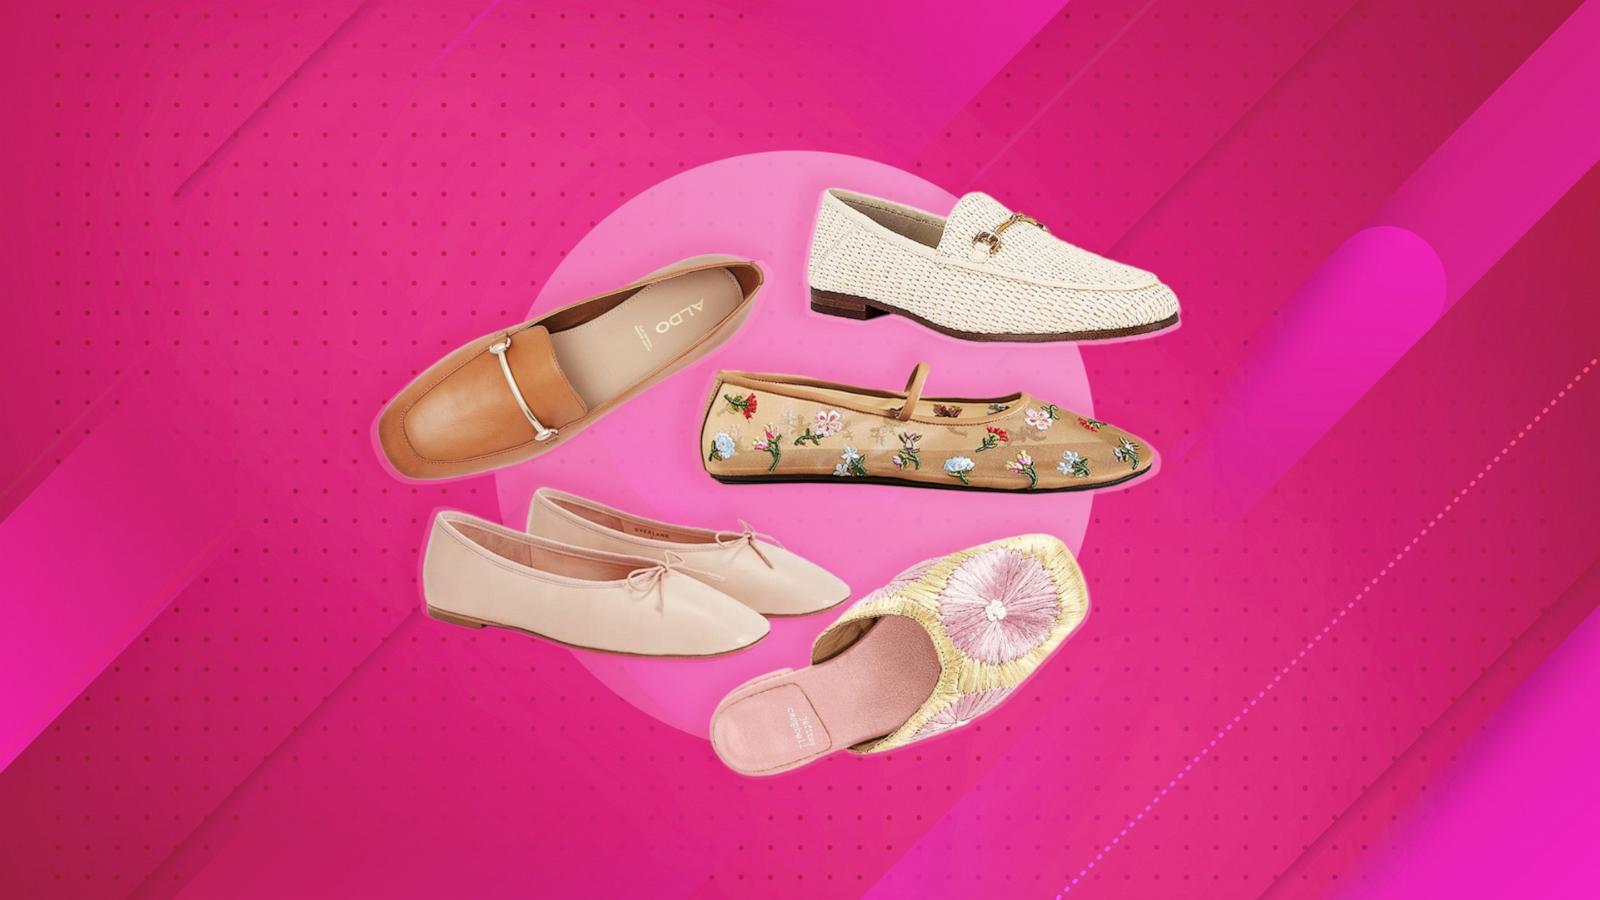 Comfortable women's flats for spring: Shop ballet flats, loafers